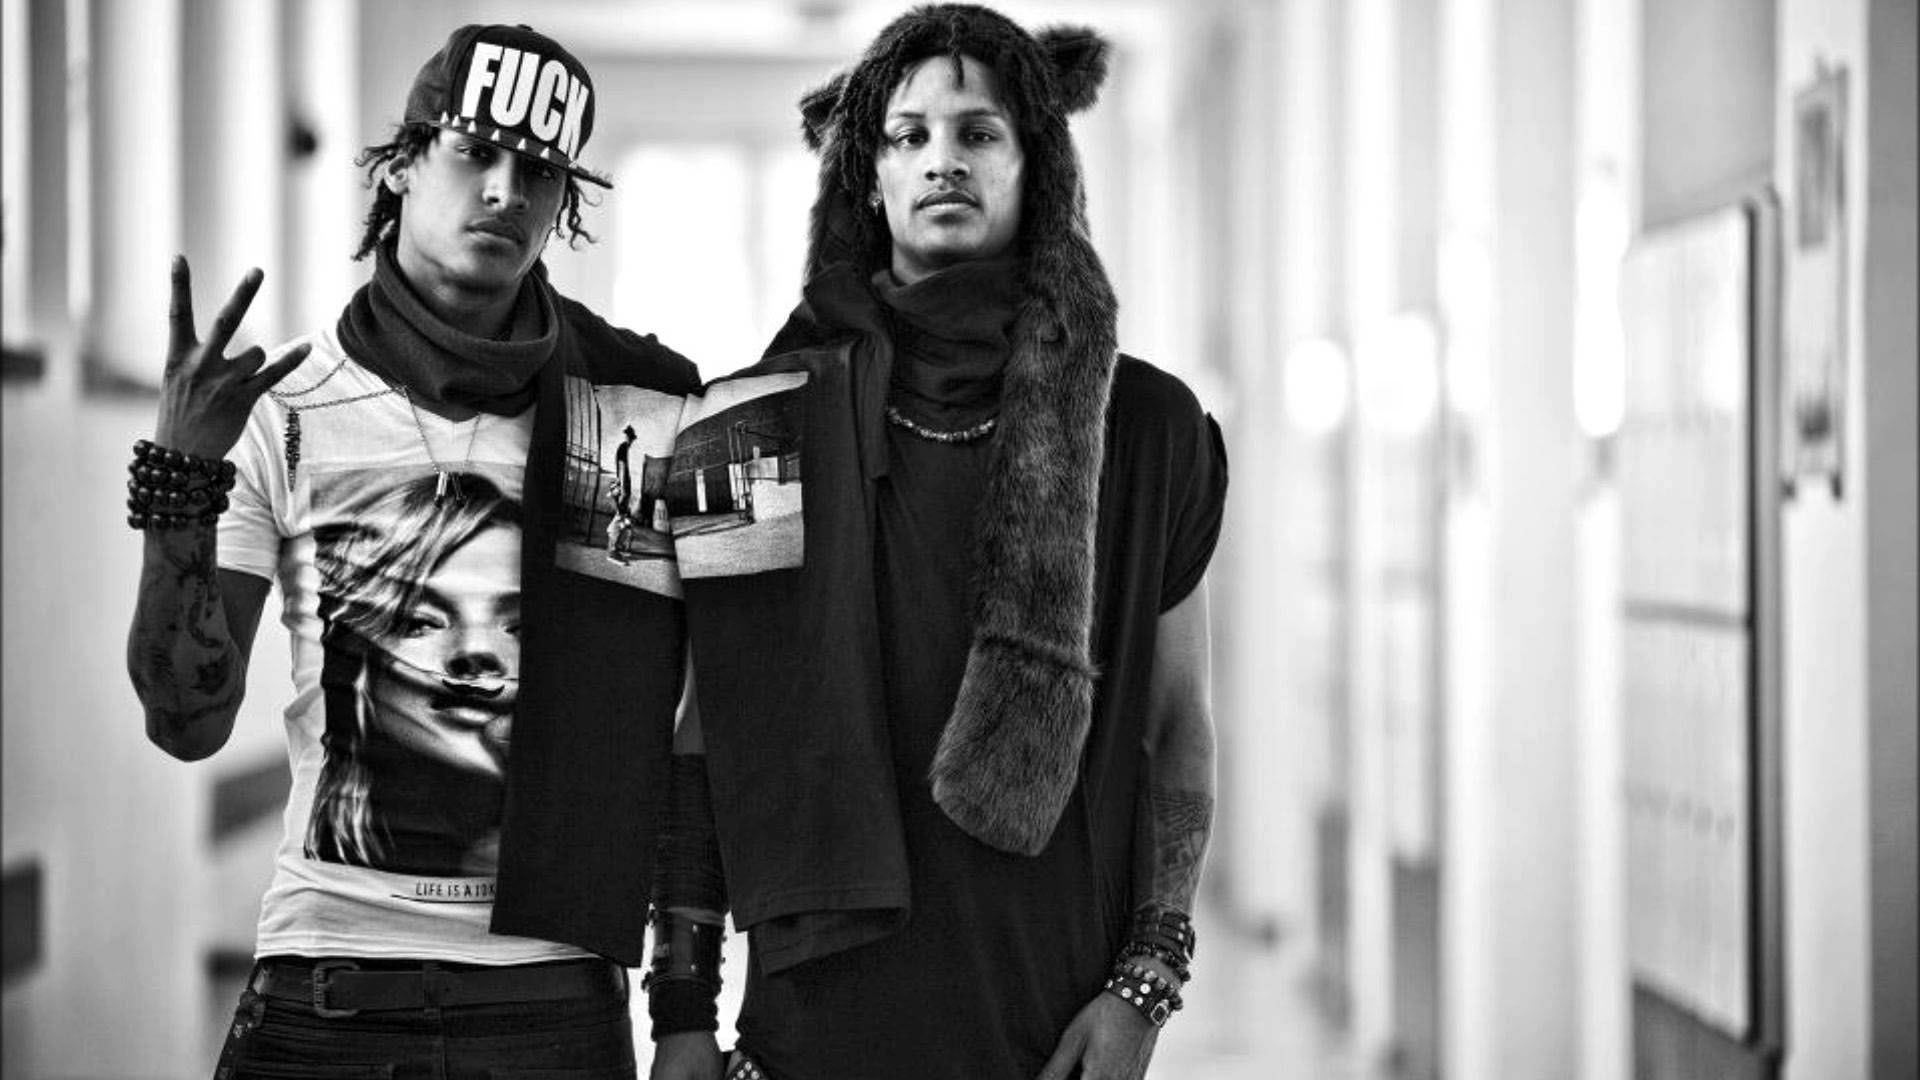 Les Twins wallpapers, Top free, Backgrounds, 1920x1080 Full HD Desktop